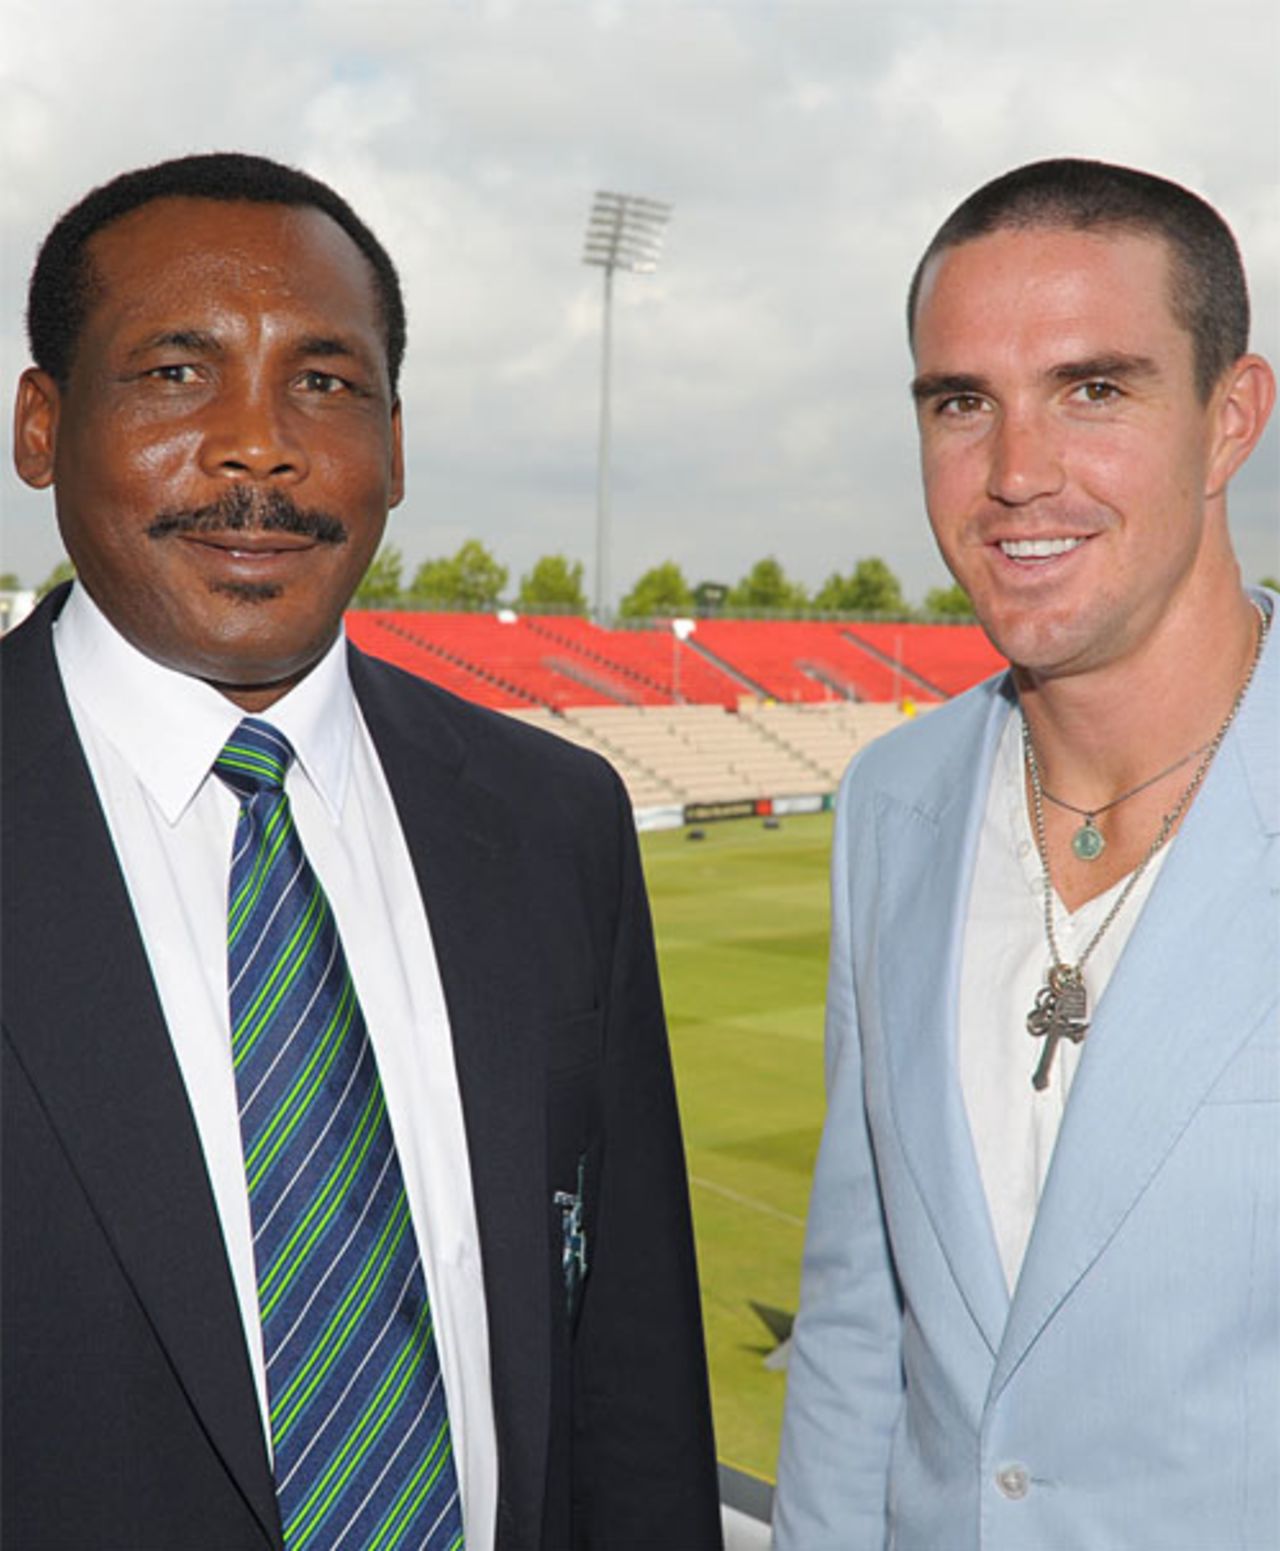 Gordon Greenidge and Kevin Pietersen at the launch of the Stanford Super Series, Rose Bowl, July 25, 2008